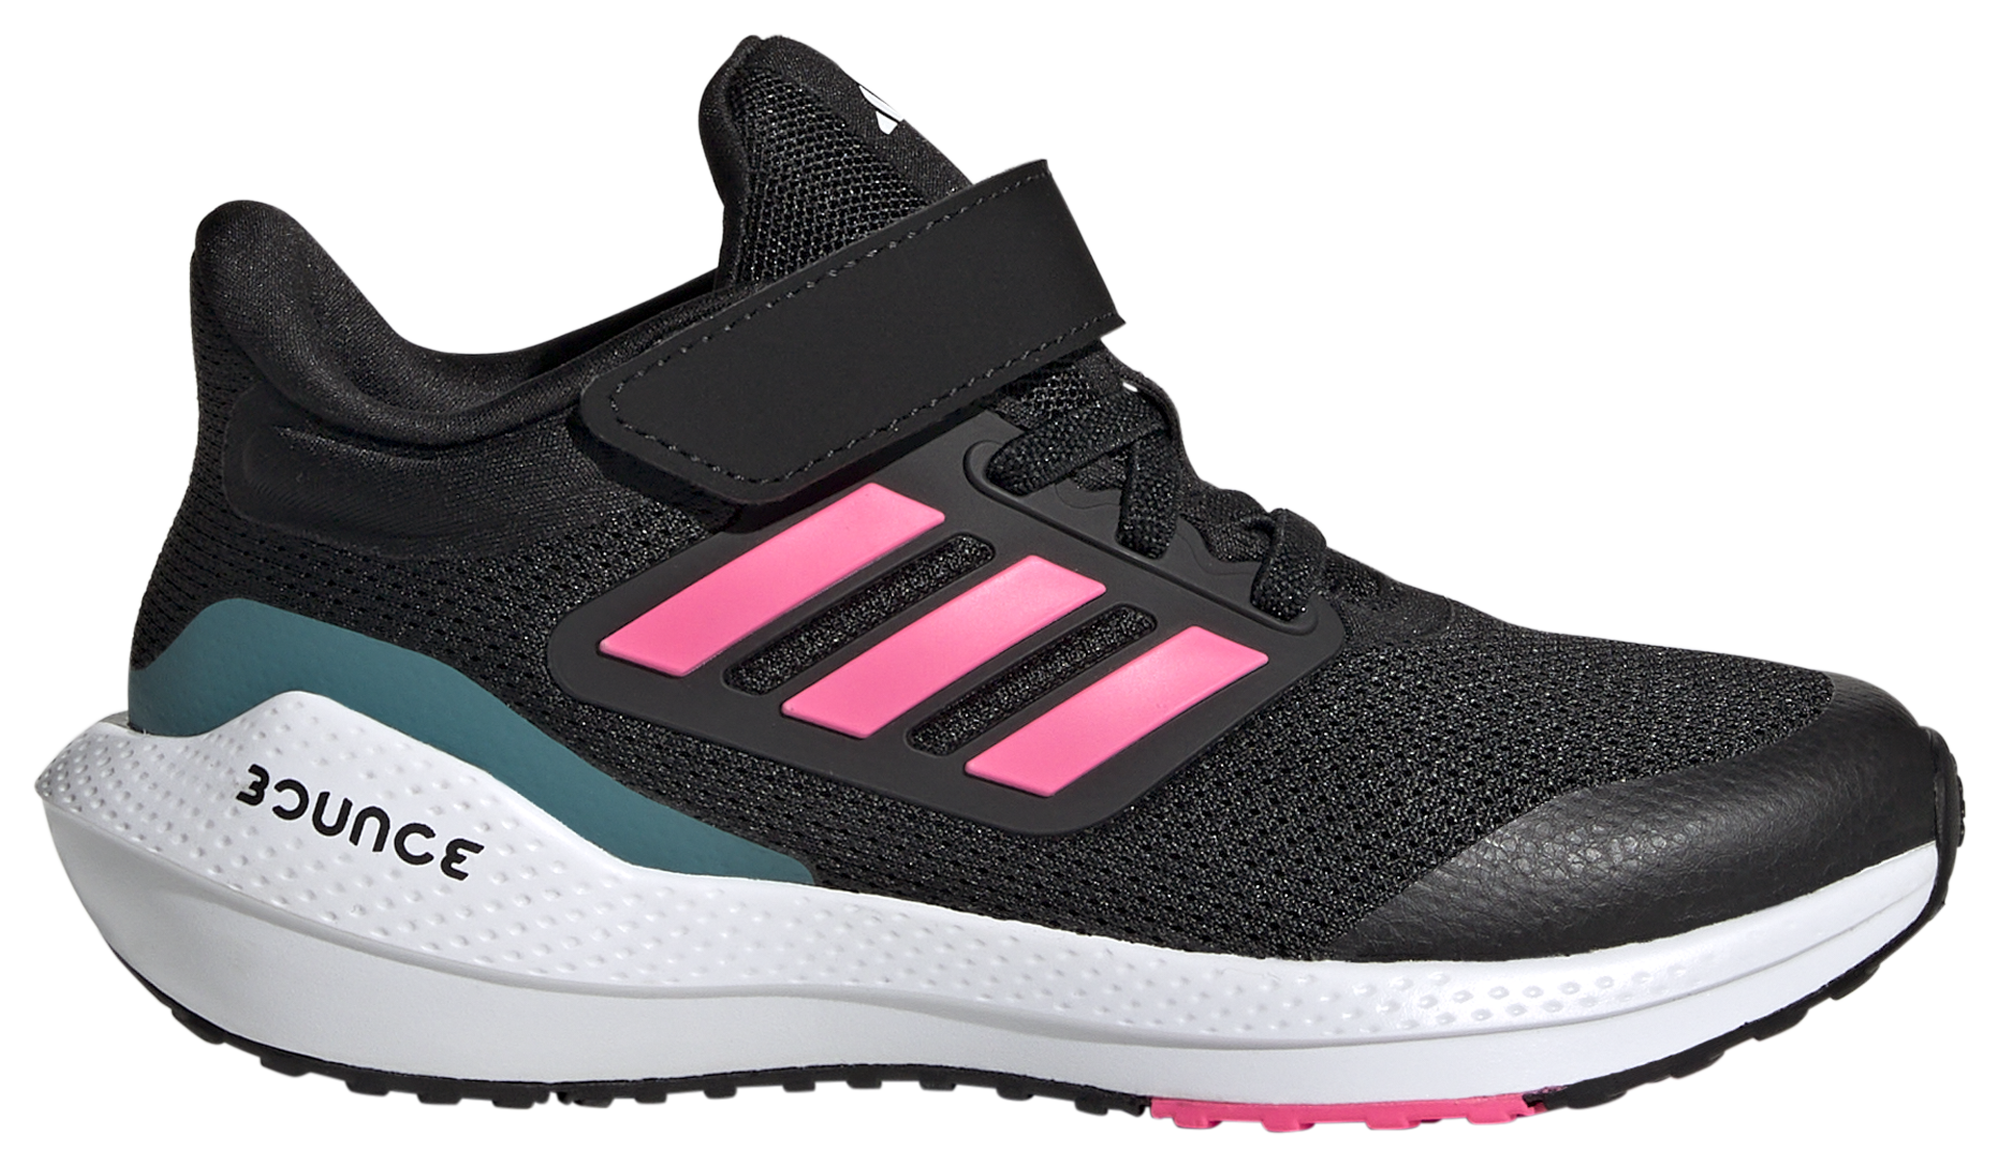 schelp overdrijving tuin adidas Ultrabounce Shoes | Foot Locker